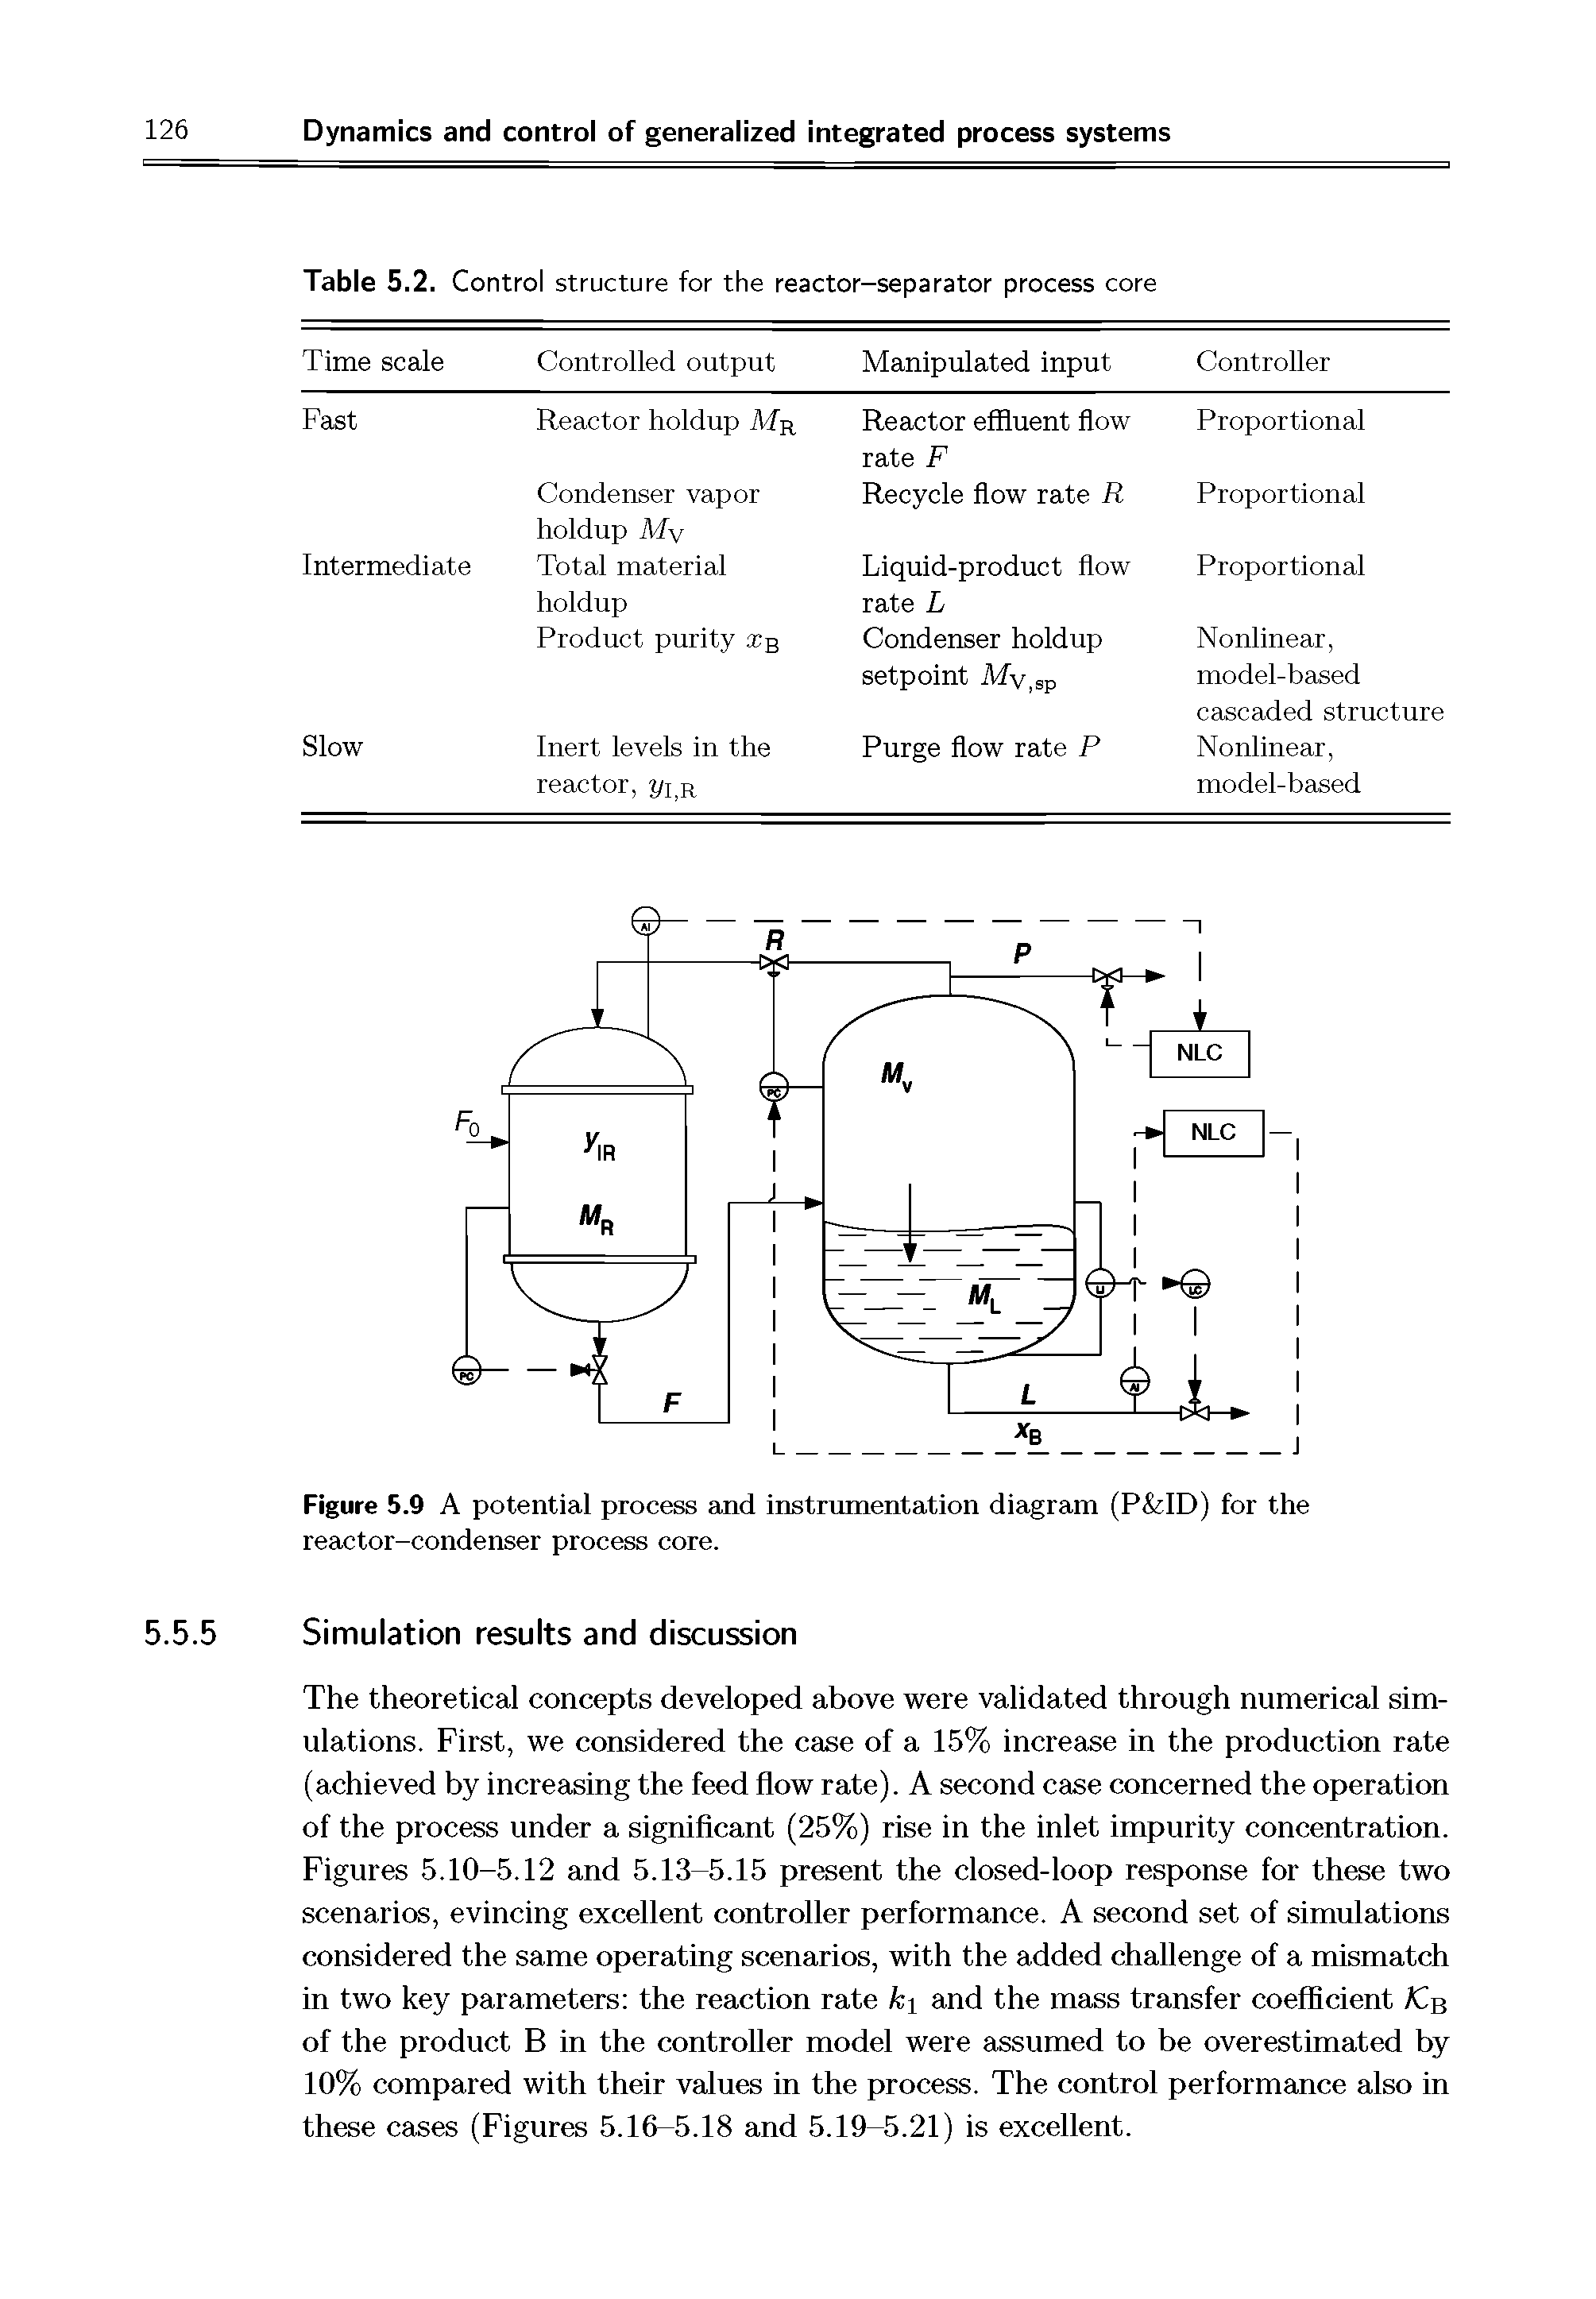 Figure 5.9 A potential process and instrumentation diagram (P ID) for the reactor-condenser process core.